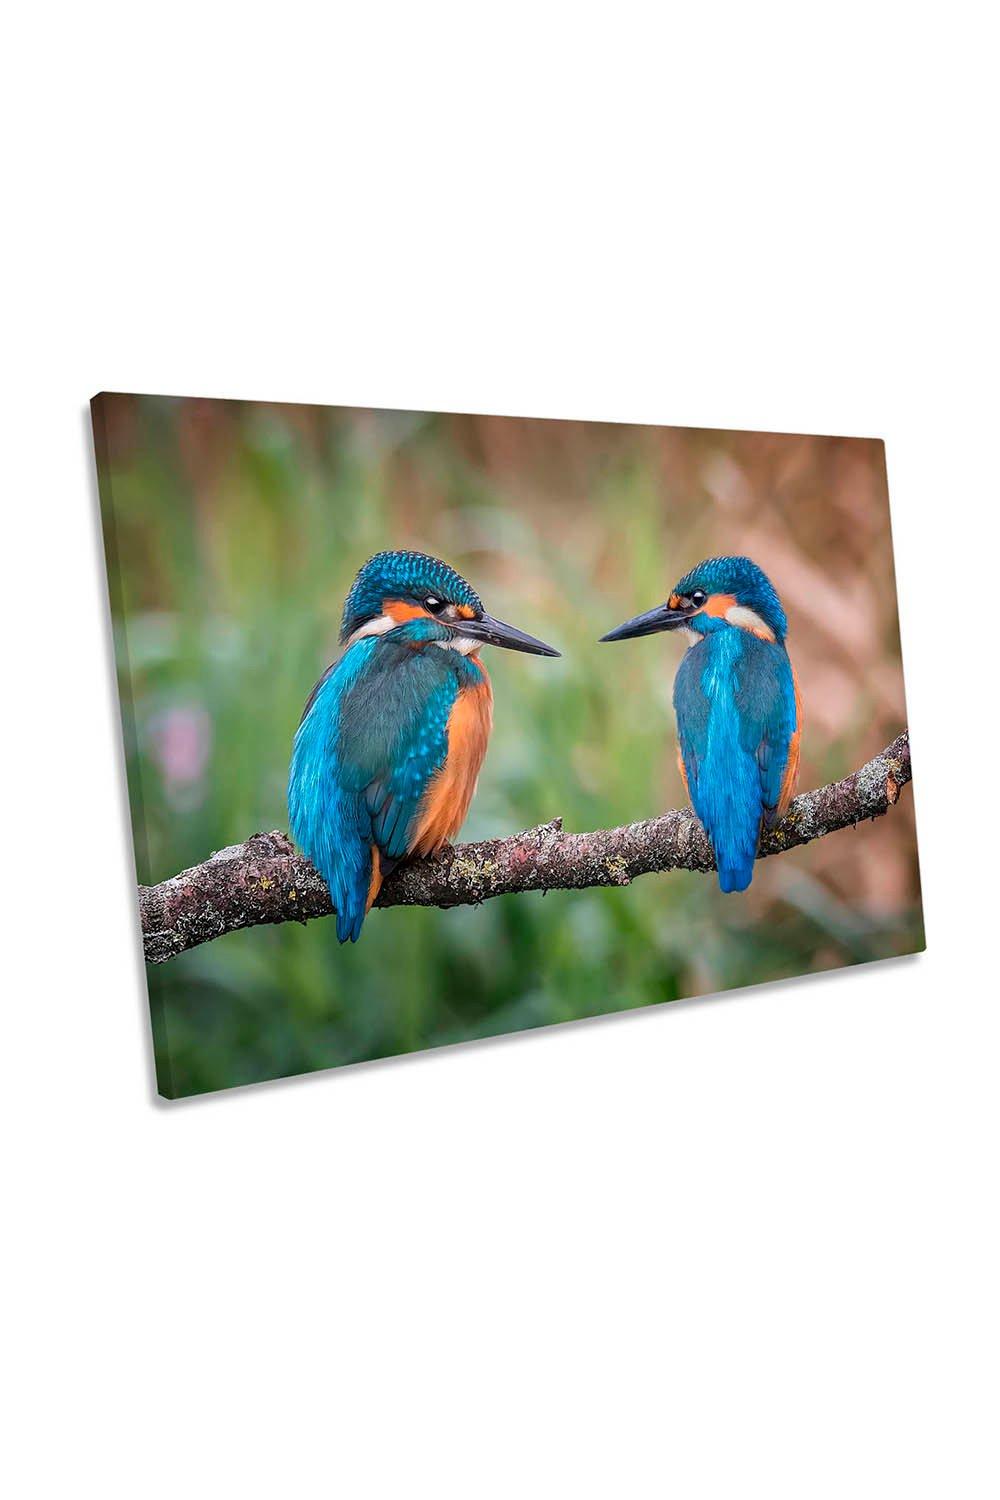 Sharing the Perch Kingfisher Birds Canvas Wall Art Picture Print